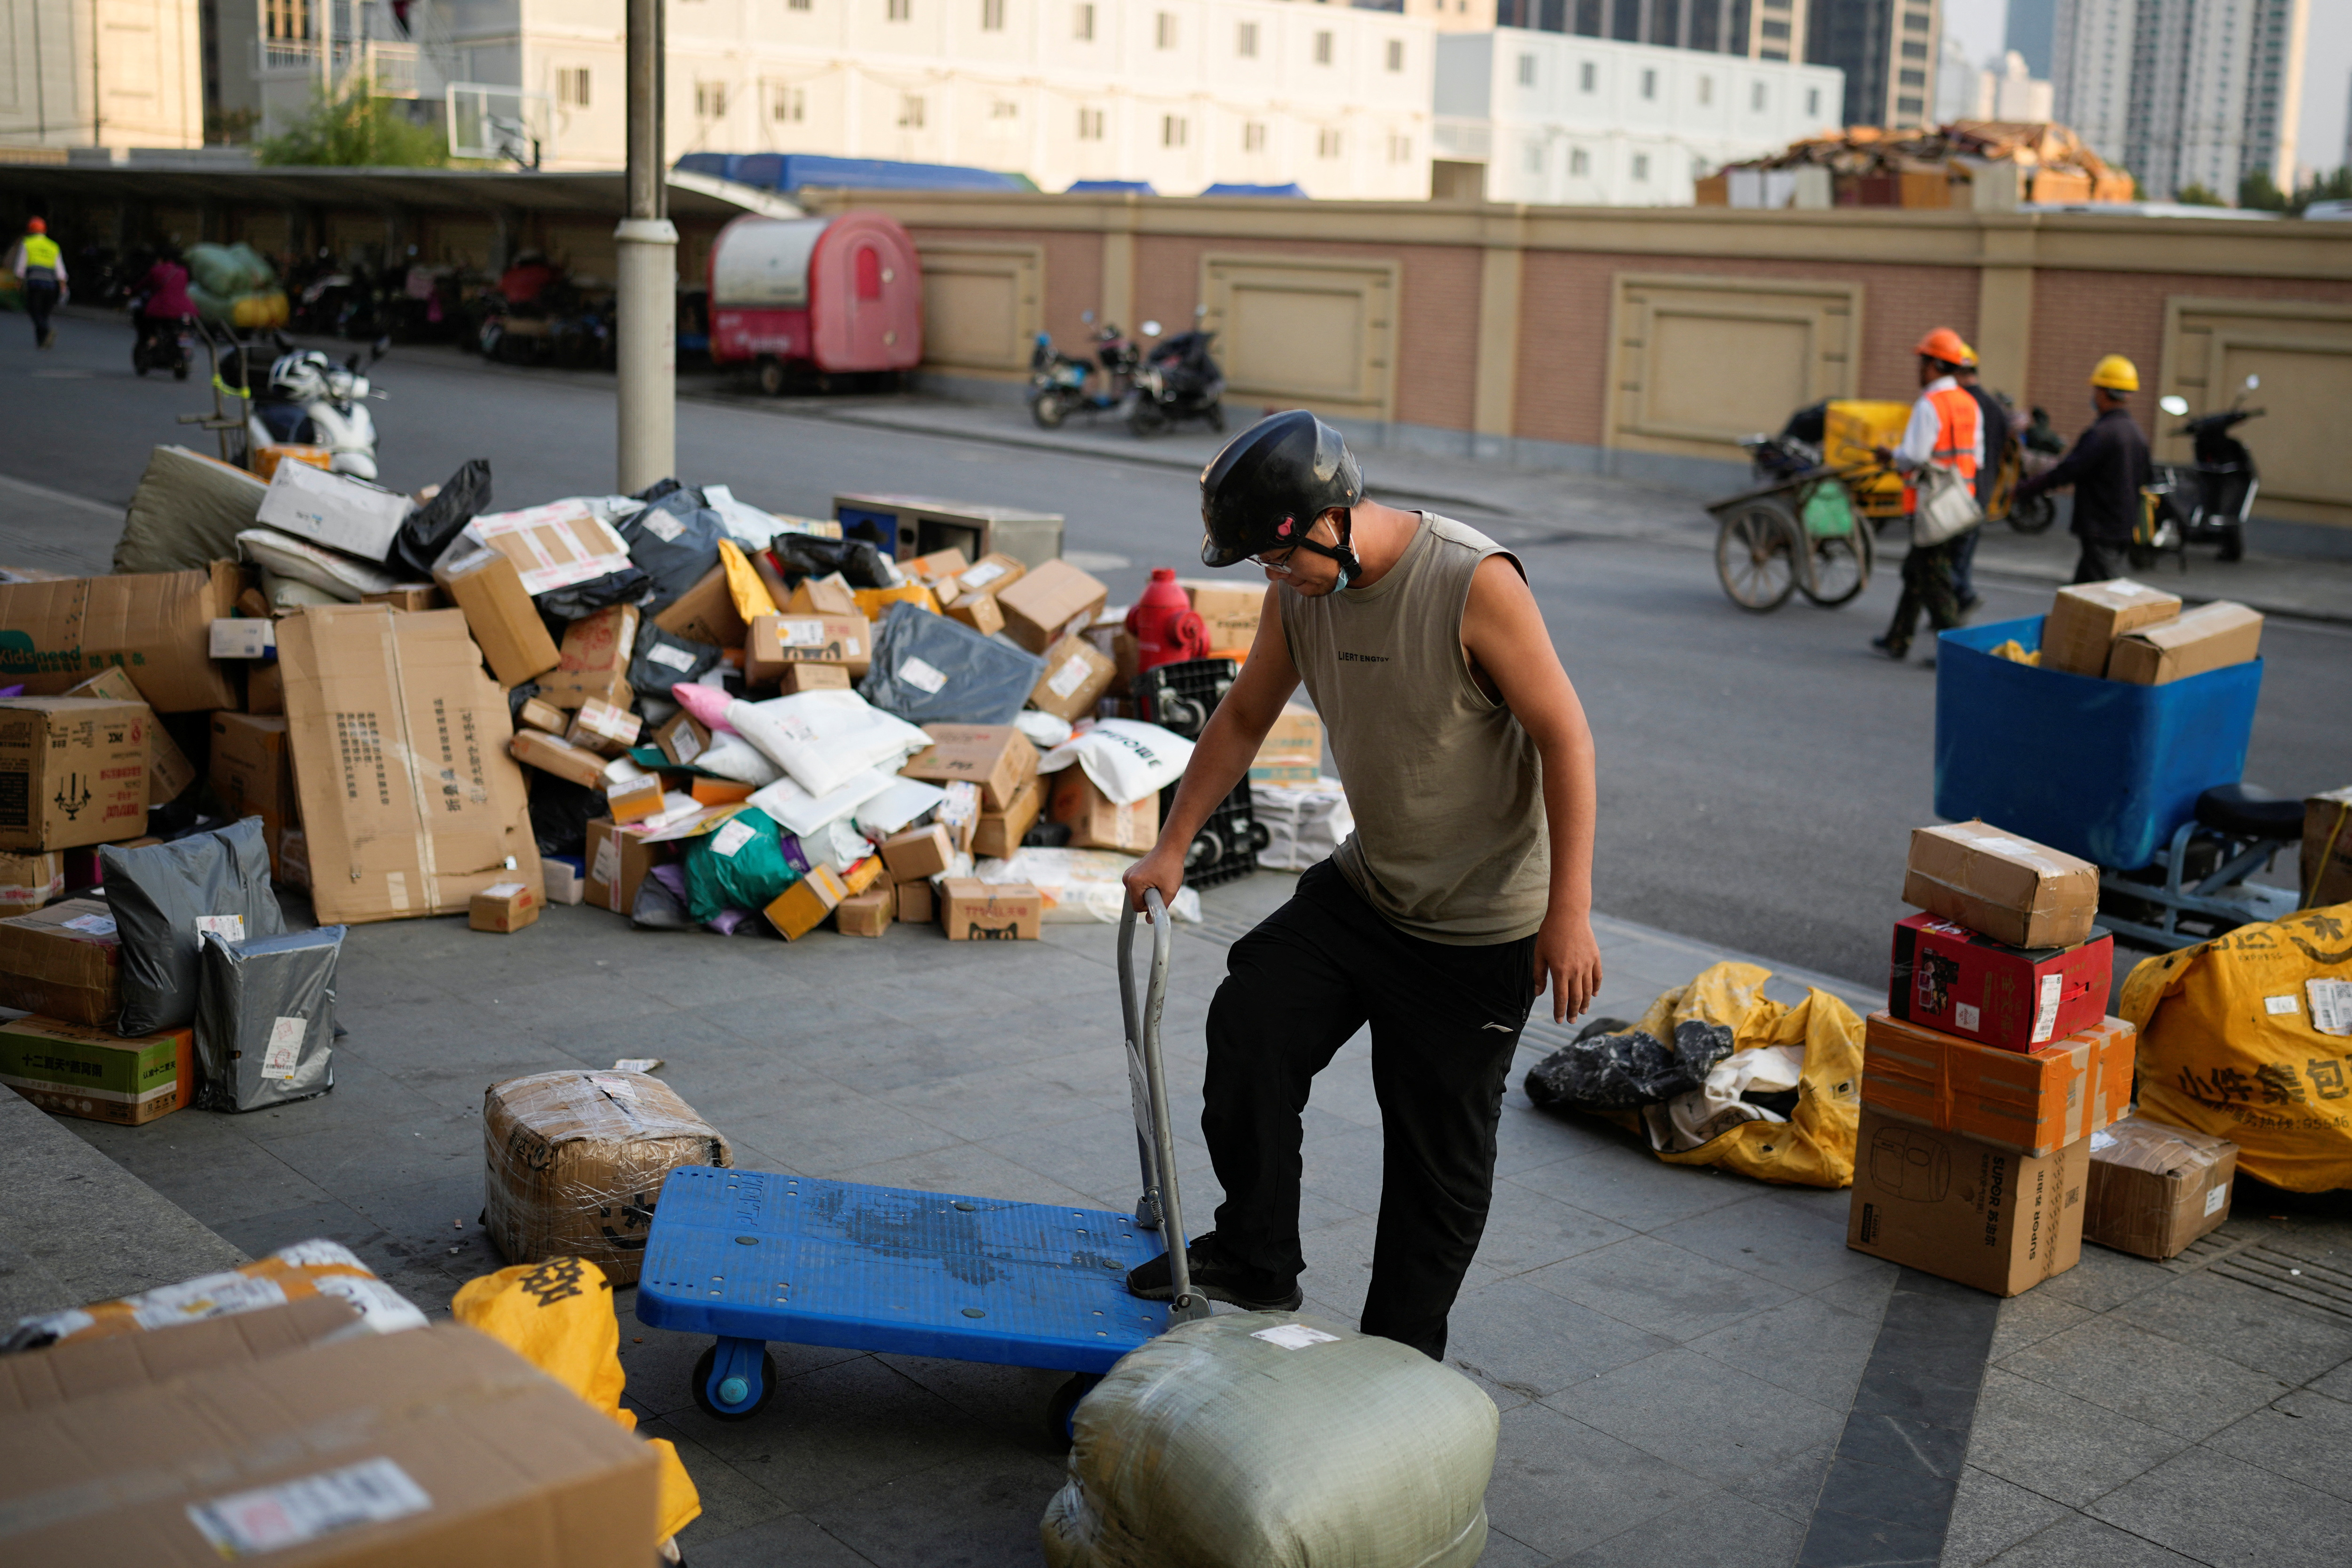 A delivery worker sorts parcels at a makeshift logistics station ahead of Alibaba's Singles' Day shopping festival, following the coronavirus disease (COVID-19) outbreak in Shanghai